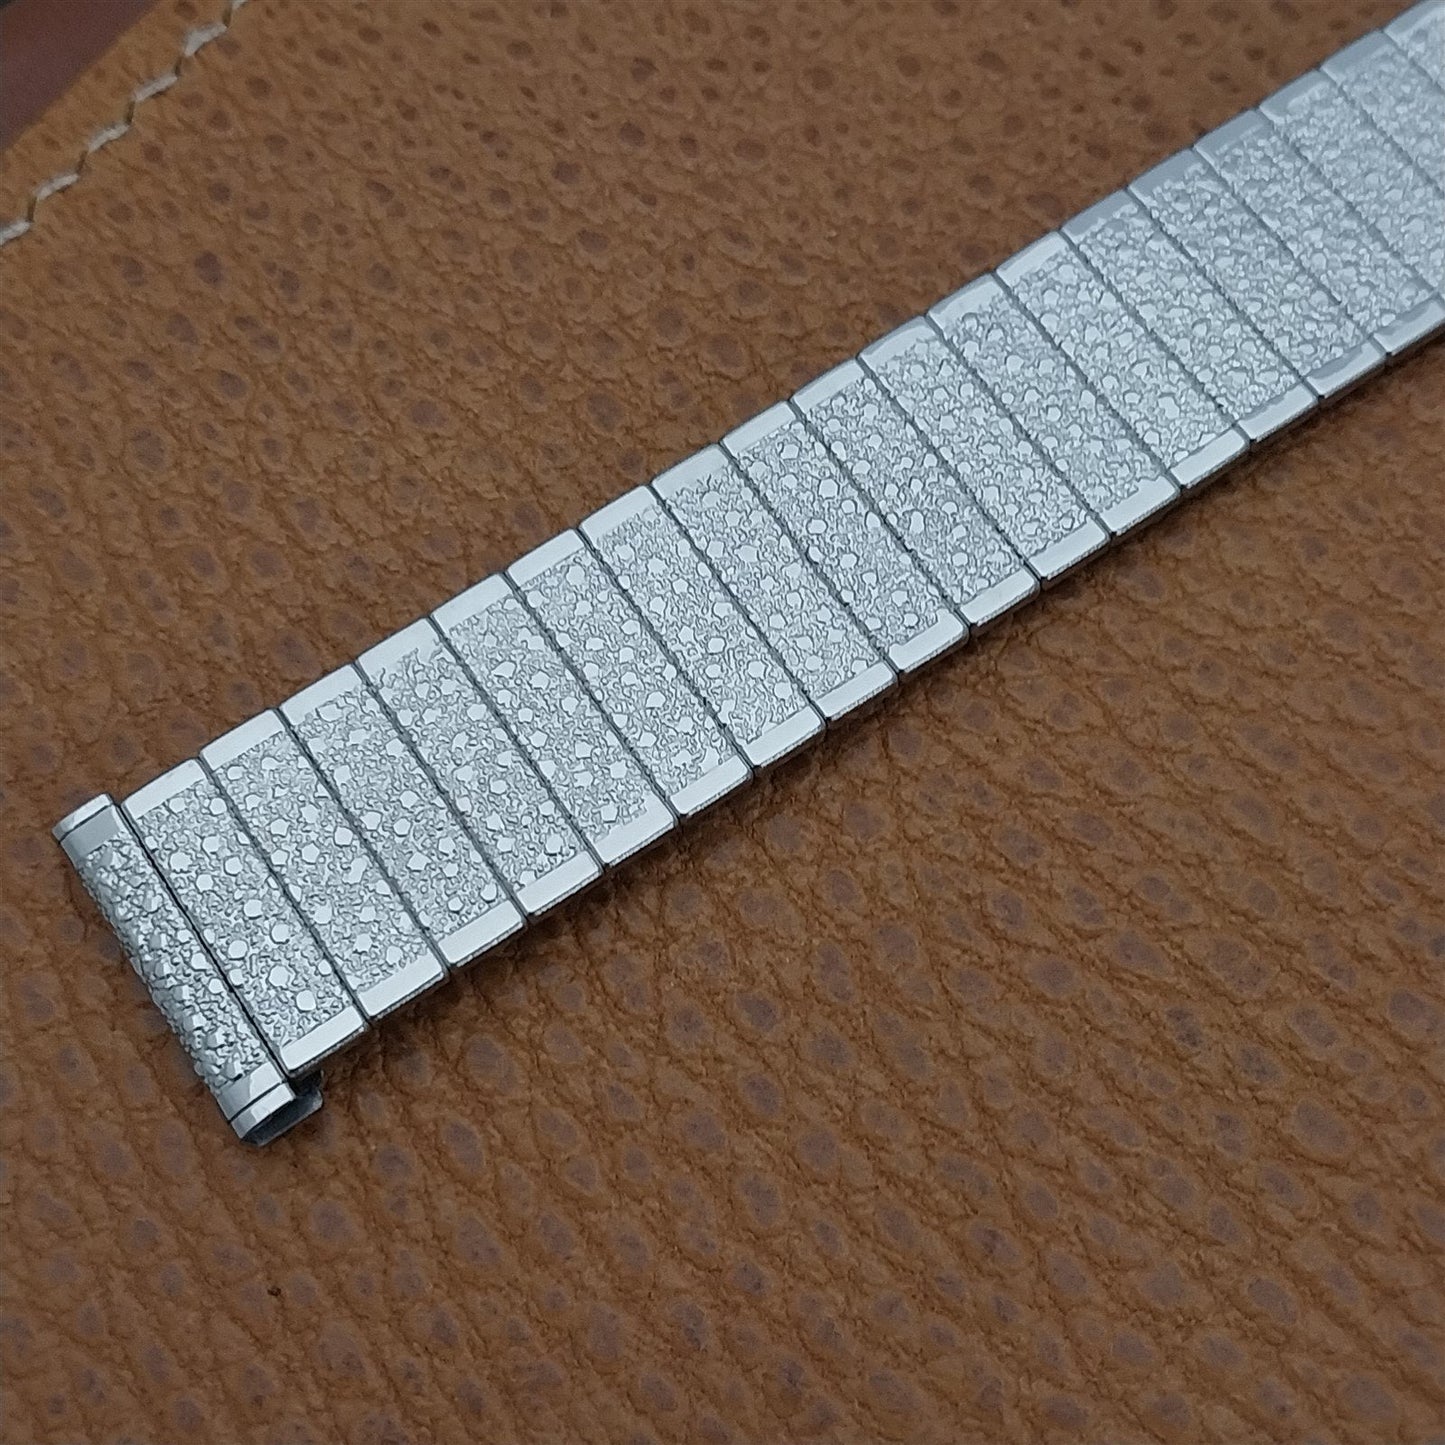 17.2mm Uniflex Slim Stainless Steel Expansion 1960s Vintage Watch Band